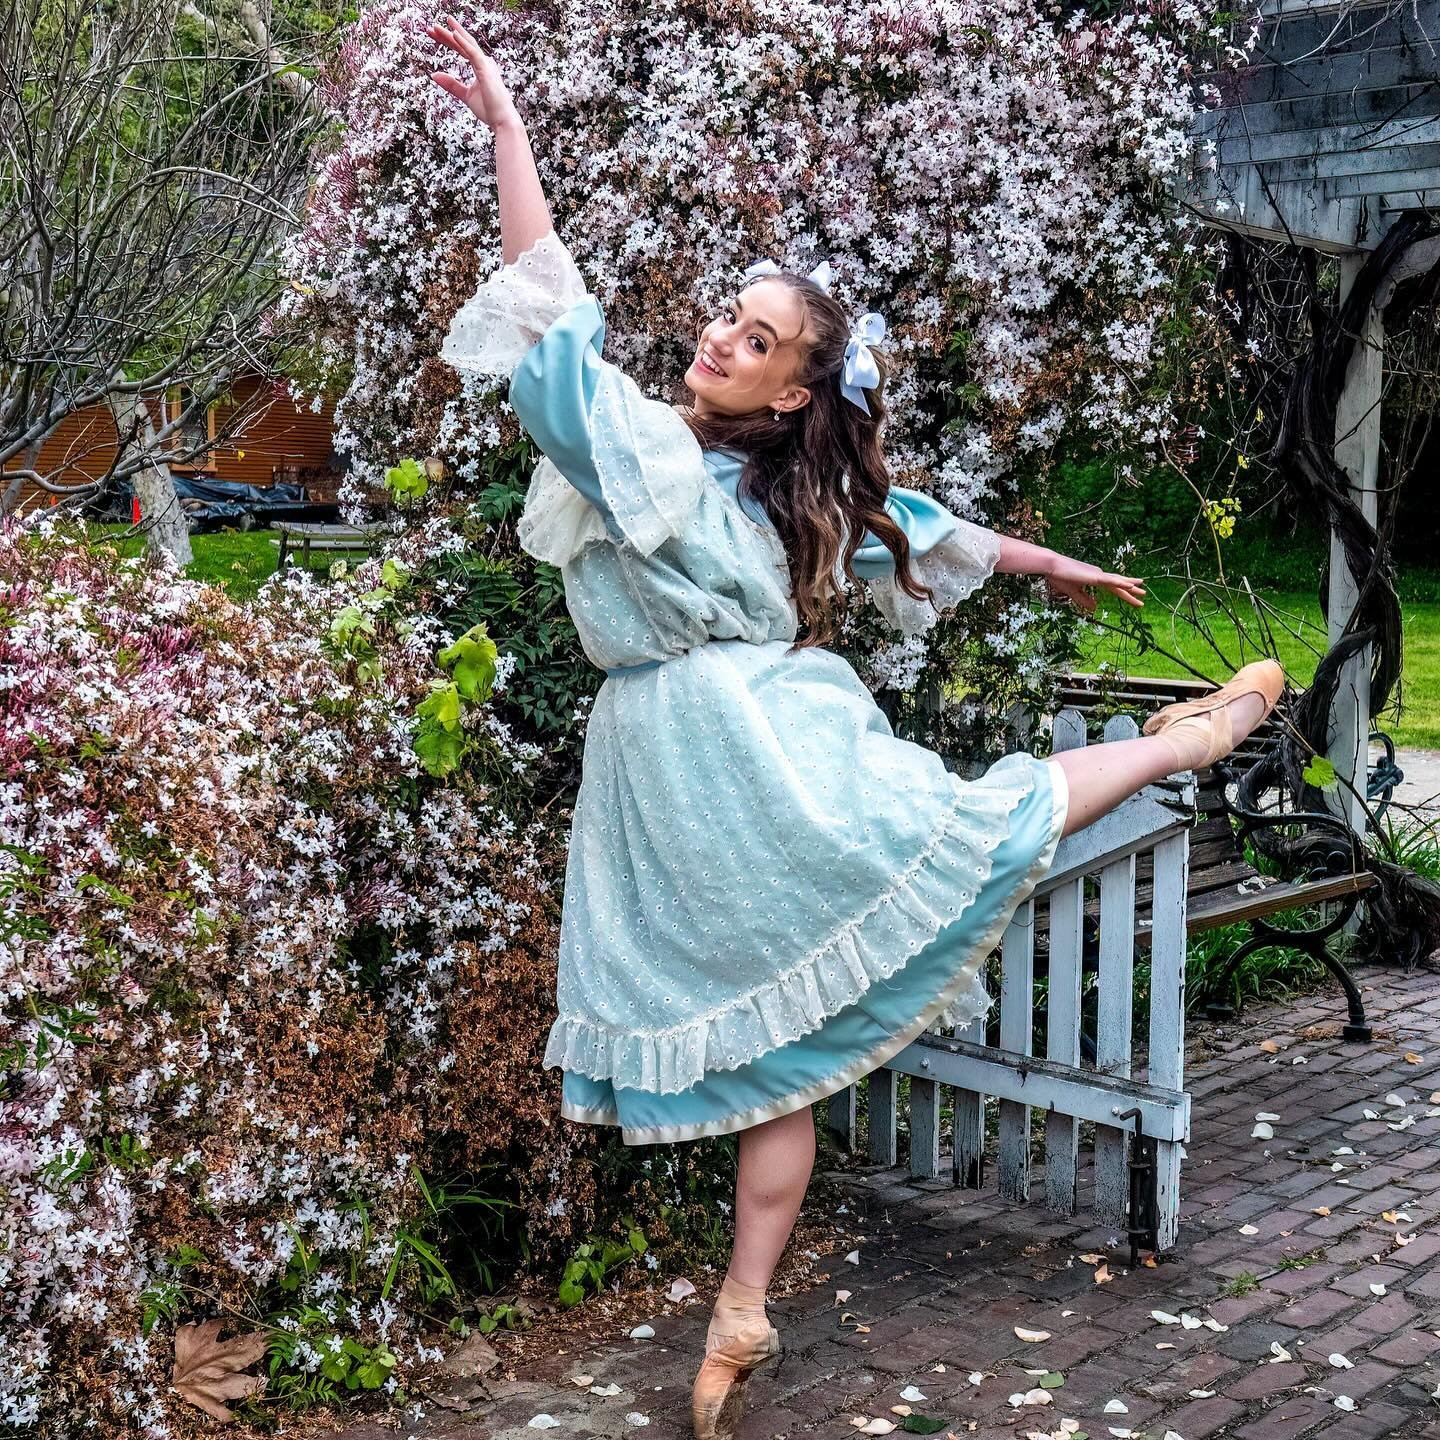 Introducing our new AMY MARCH&rsquo;s for our Spring Immersive Experience! They will be dancing alongside our current cast member, @emilyvancitters! Help us give them a warm welcome! 🌸👩&zwj;👩&zwj;👧&zwj;👧🩰

Picture 2: CATIE FAYE SMITH 

Catie Fa